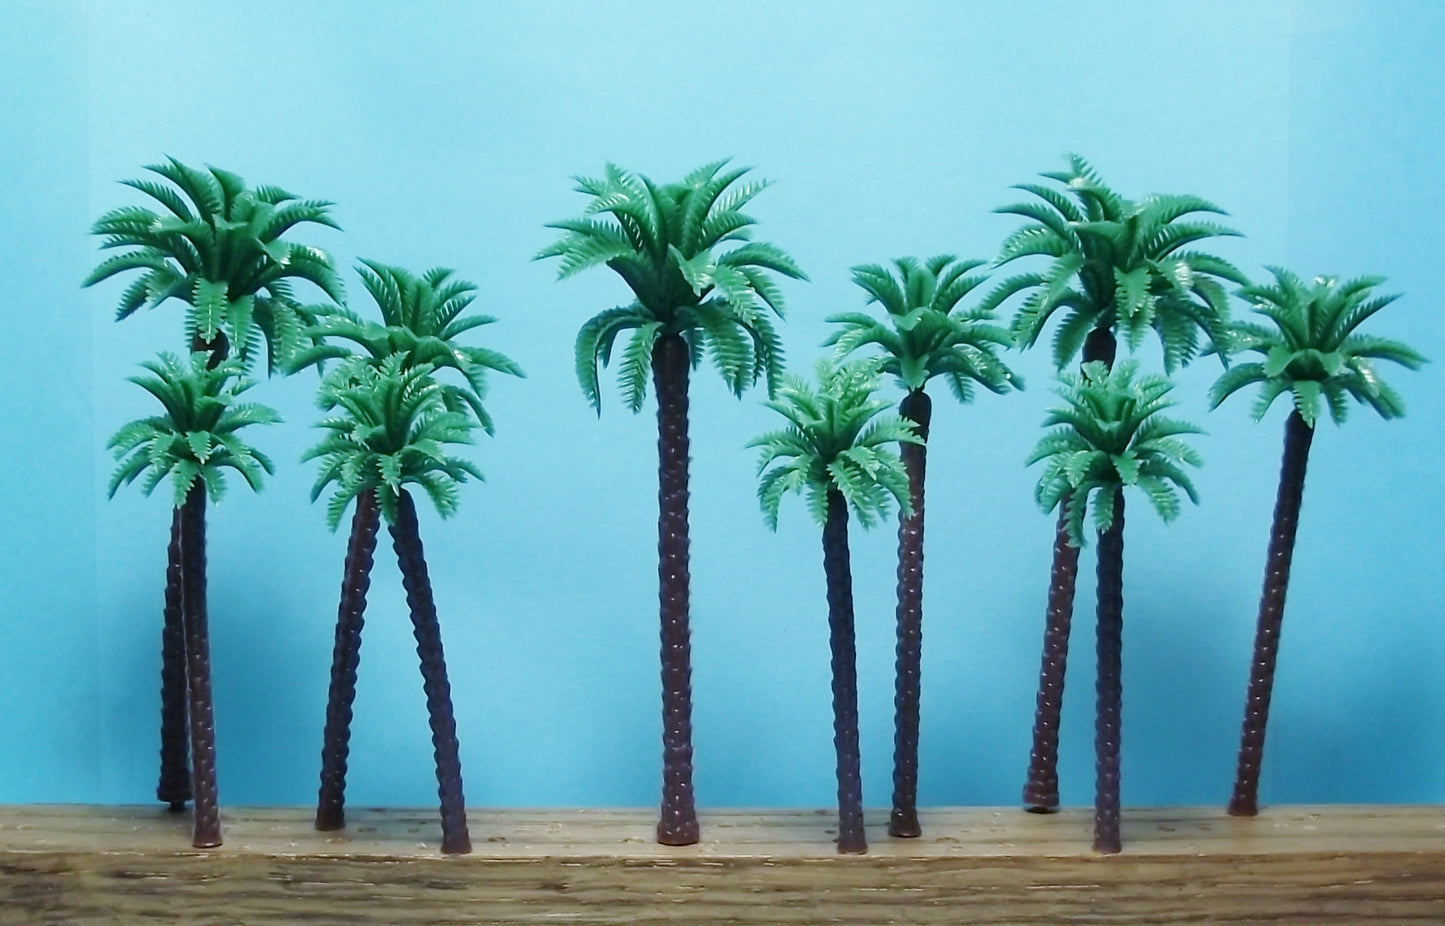 Set of Model Coconut Palm Trees for Multi Scale use 3 1/2" to 4 3/4" 10 pieces Total